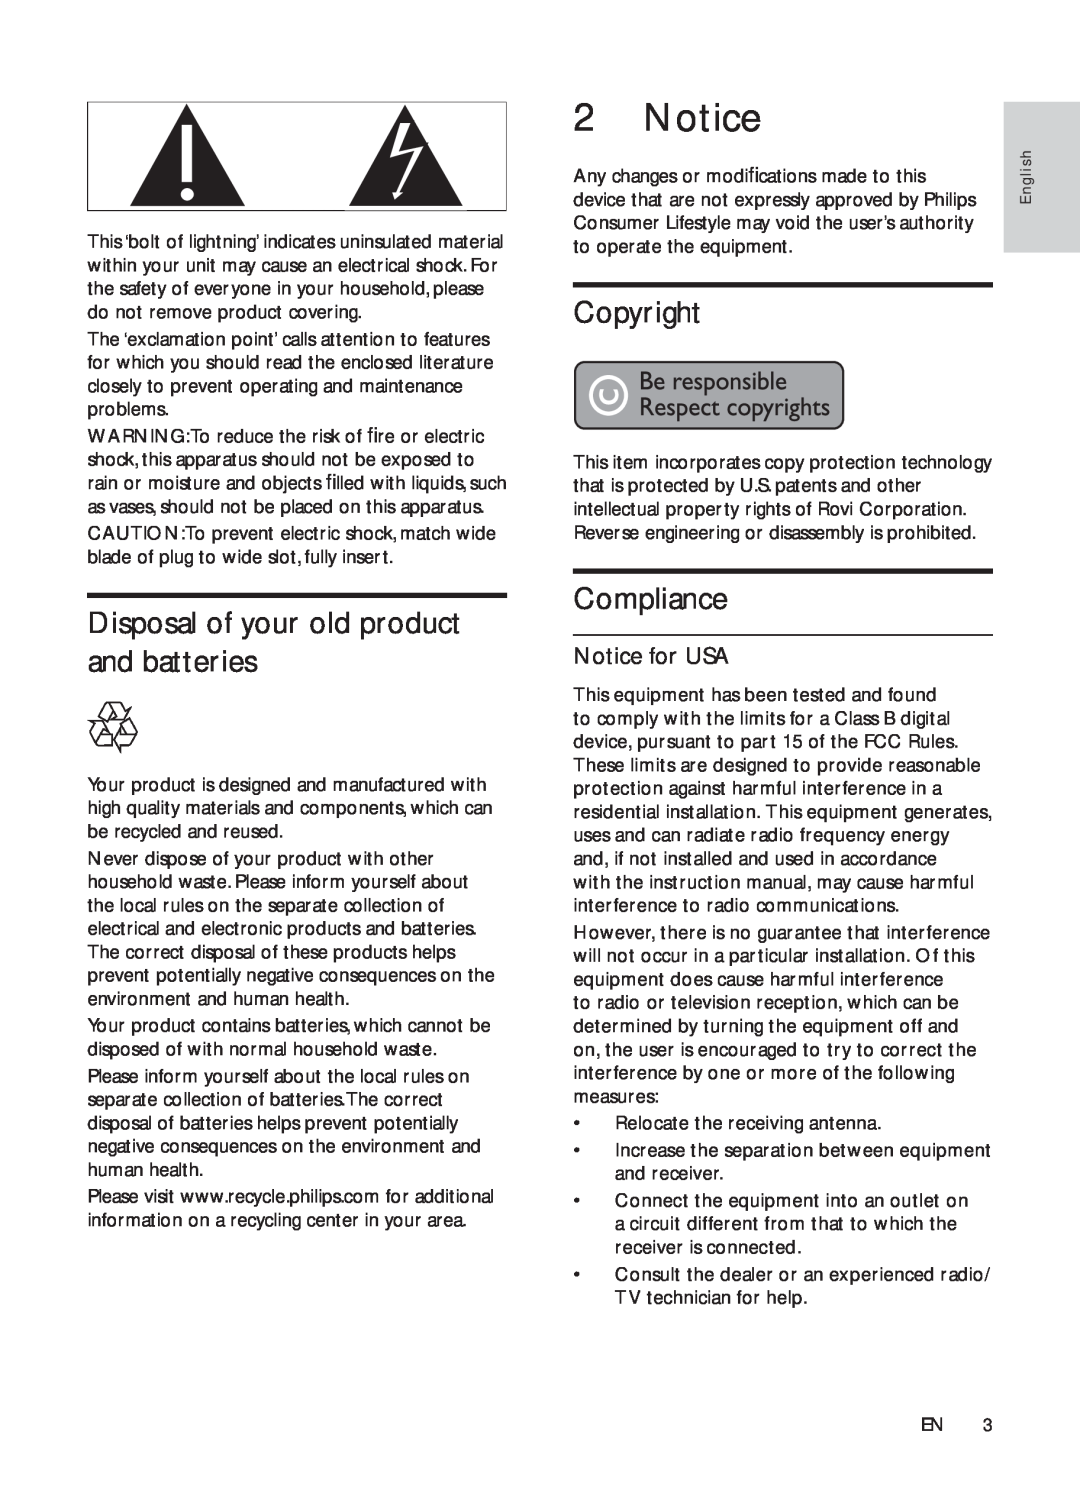 Philips HSB2313A user manual Disposal of your old product and batteries, Copyright, Compliance, Notice for USA 